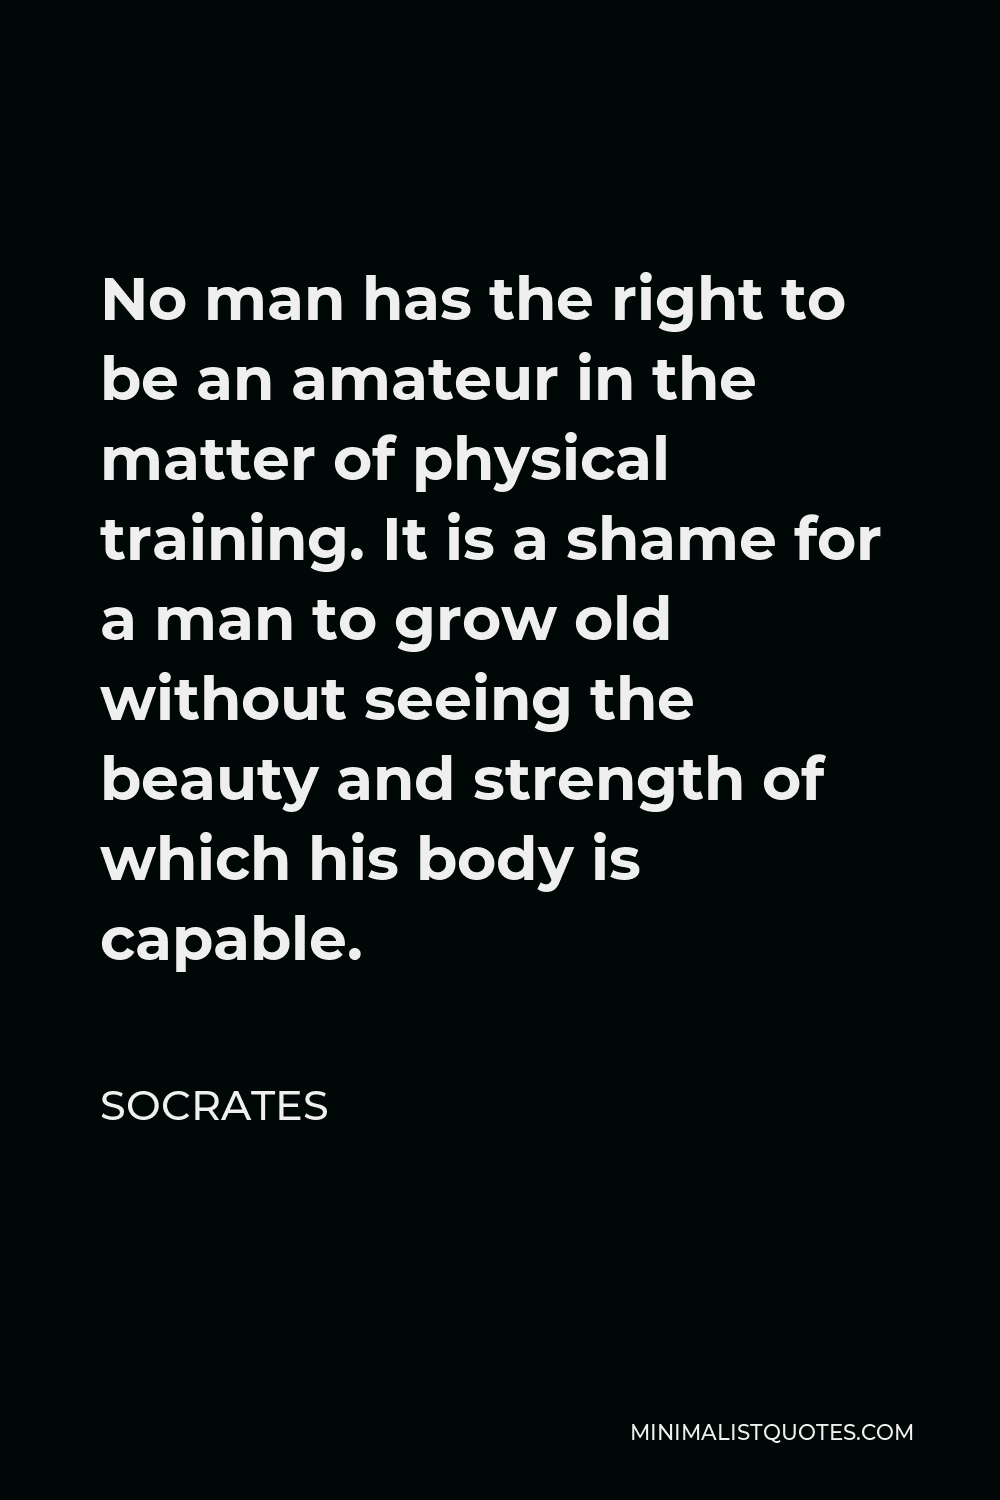 socrates quotes on fitness